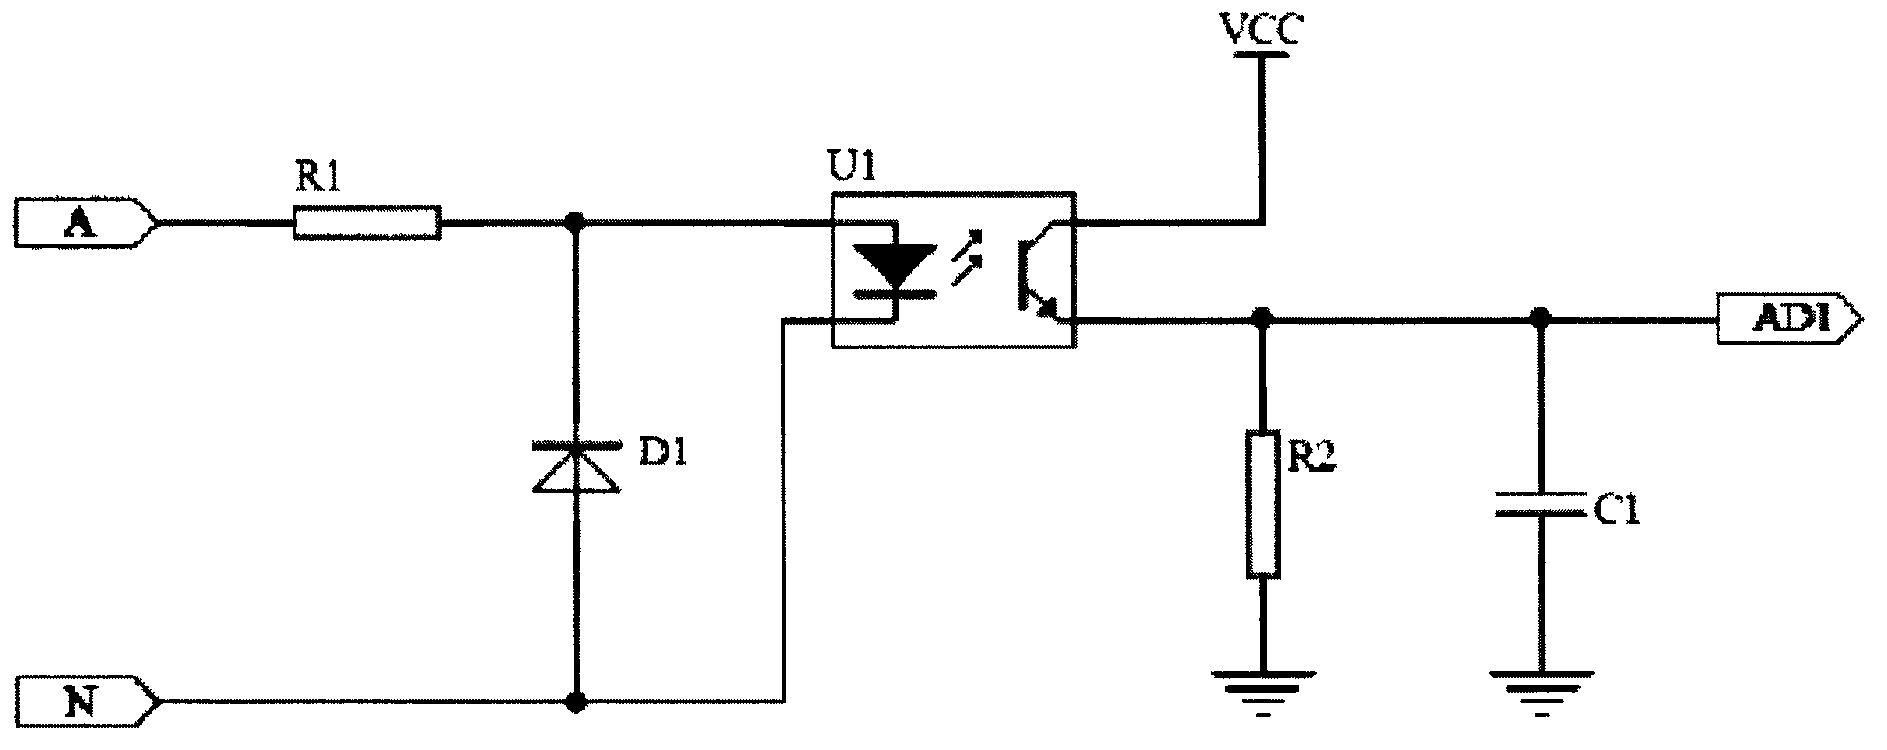 Voltage signal conditioning circuit of automatic reclosing lock breaker in time of electric leakage